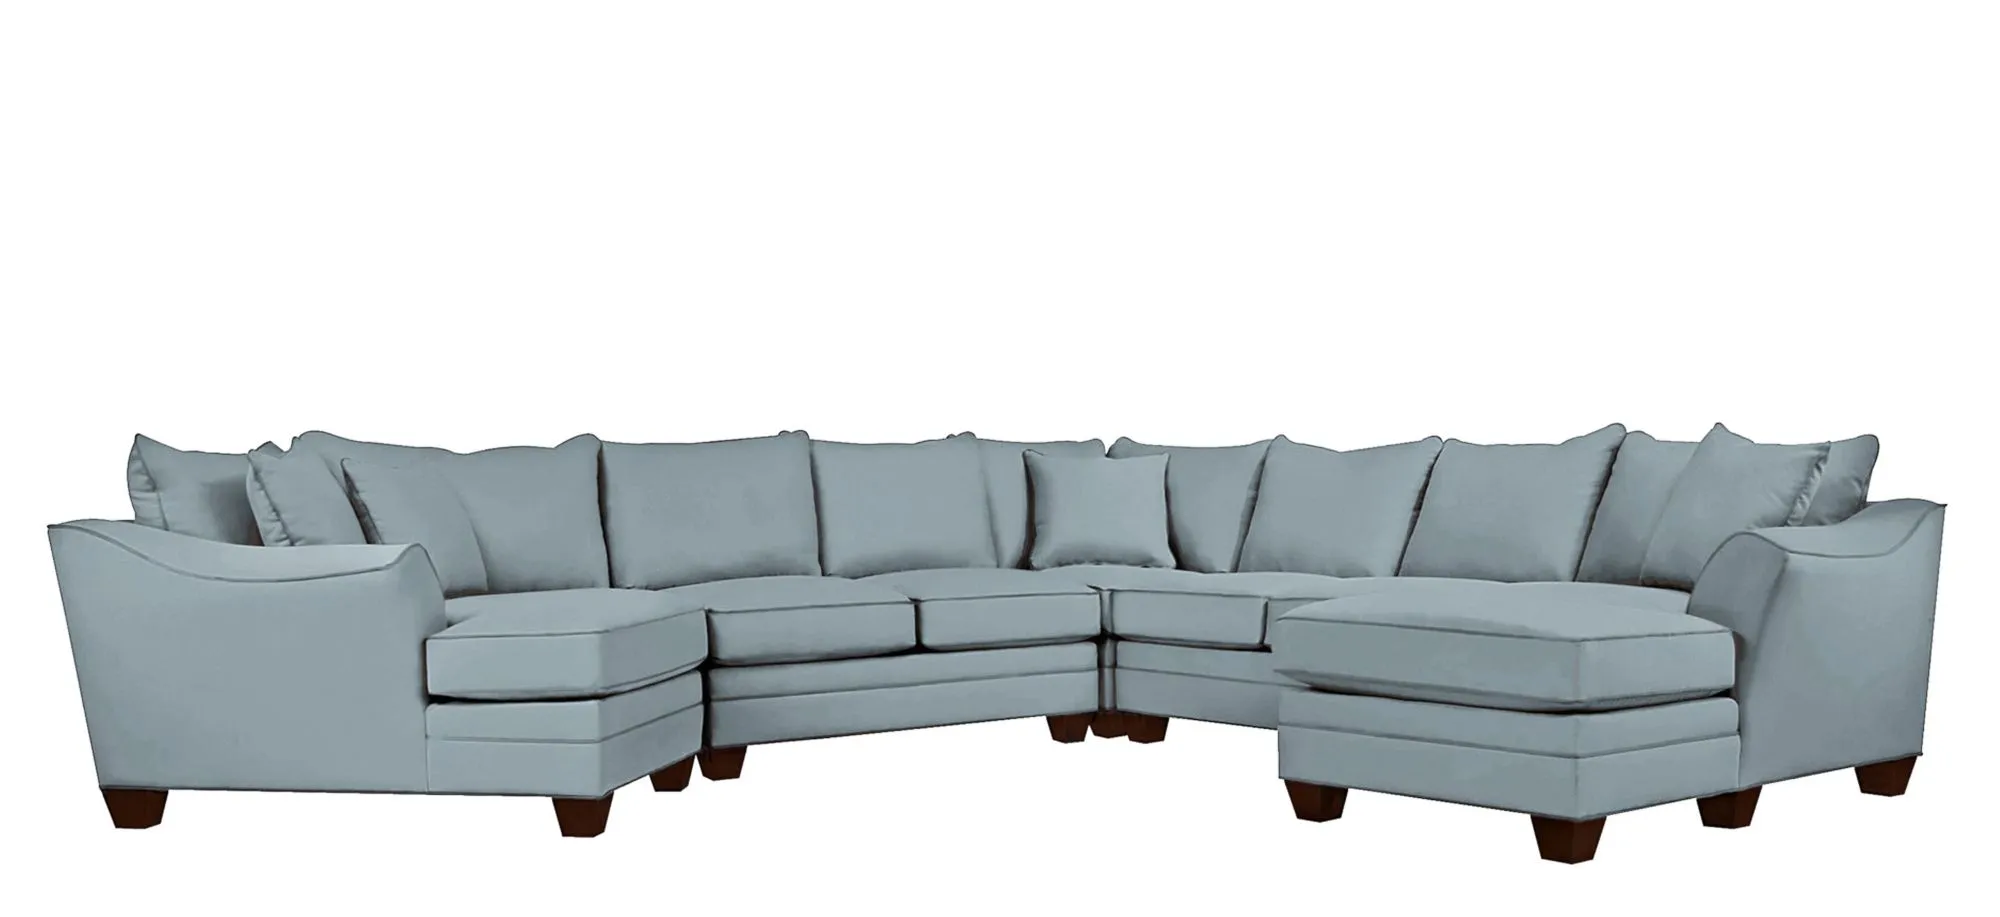 Foresthill 5-pc. Right Hand Facing Sectional Sofa in Suede So Soft Hydra by H.M. Richards